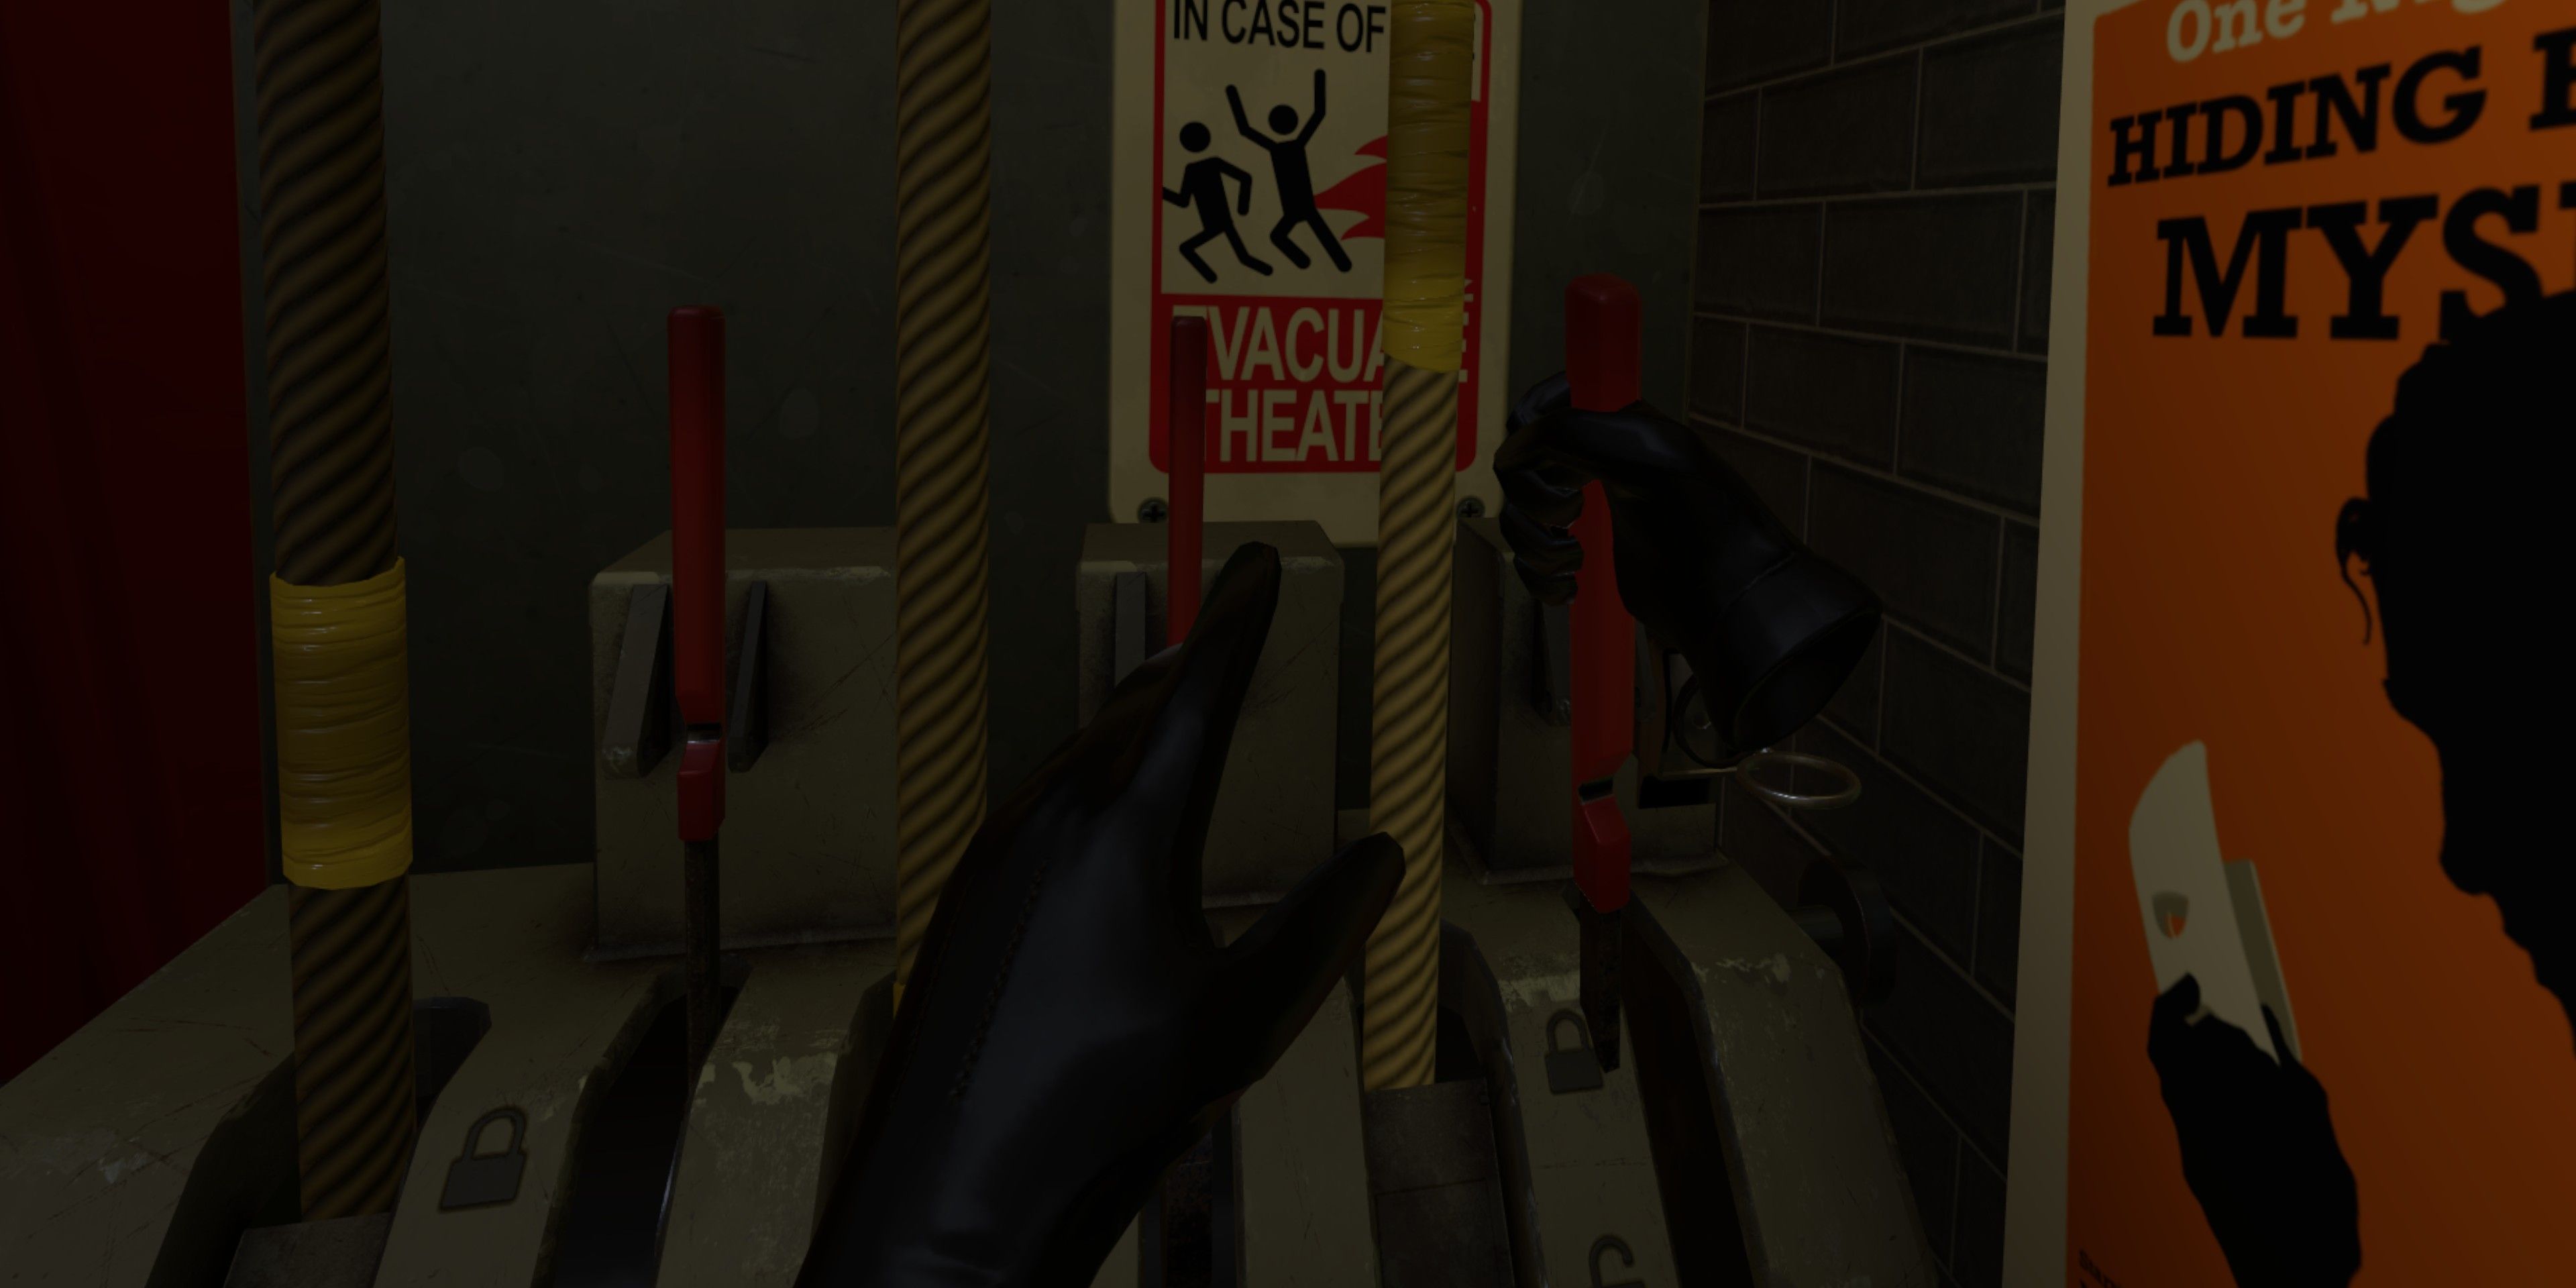 Image from I Expect You To Die 2 shoing a hand pulling a lever controlling some ropes with posters on the walls.